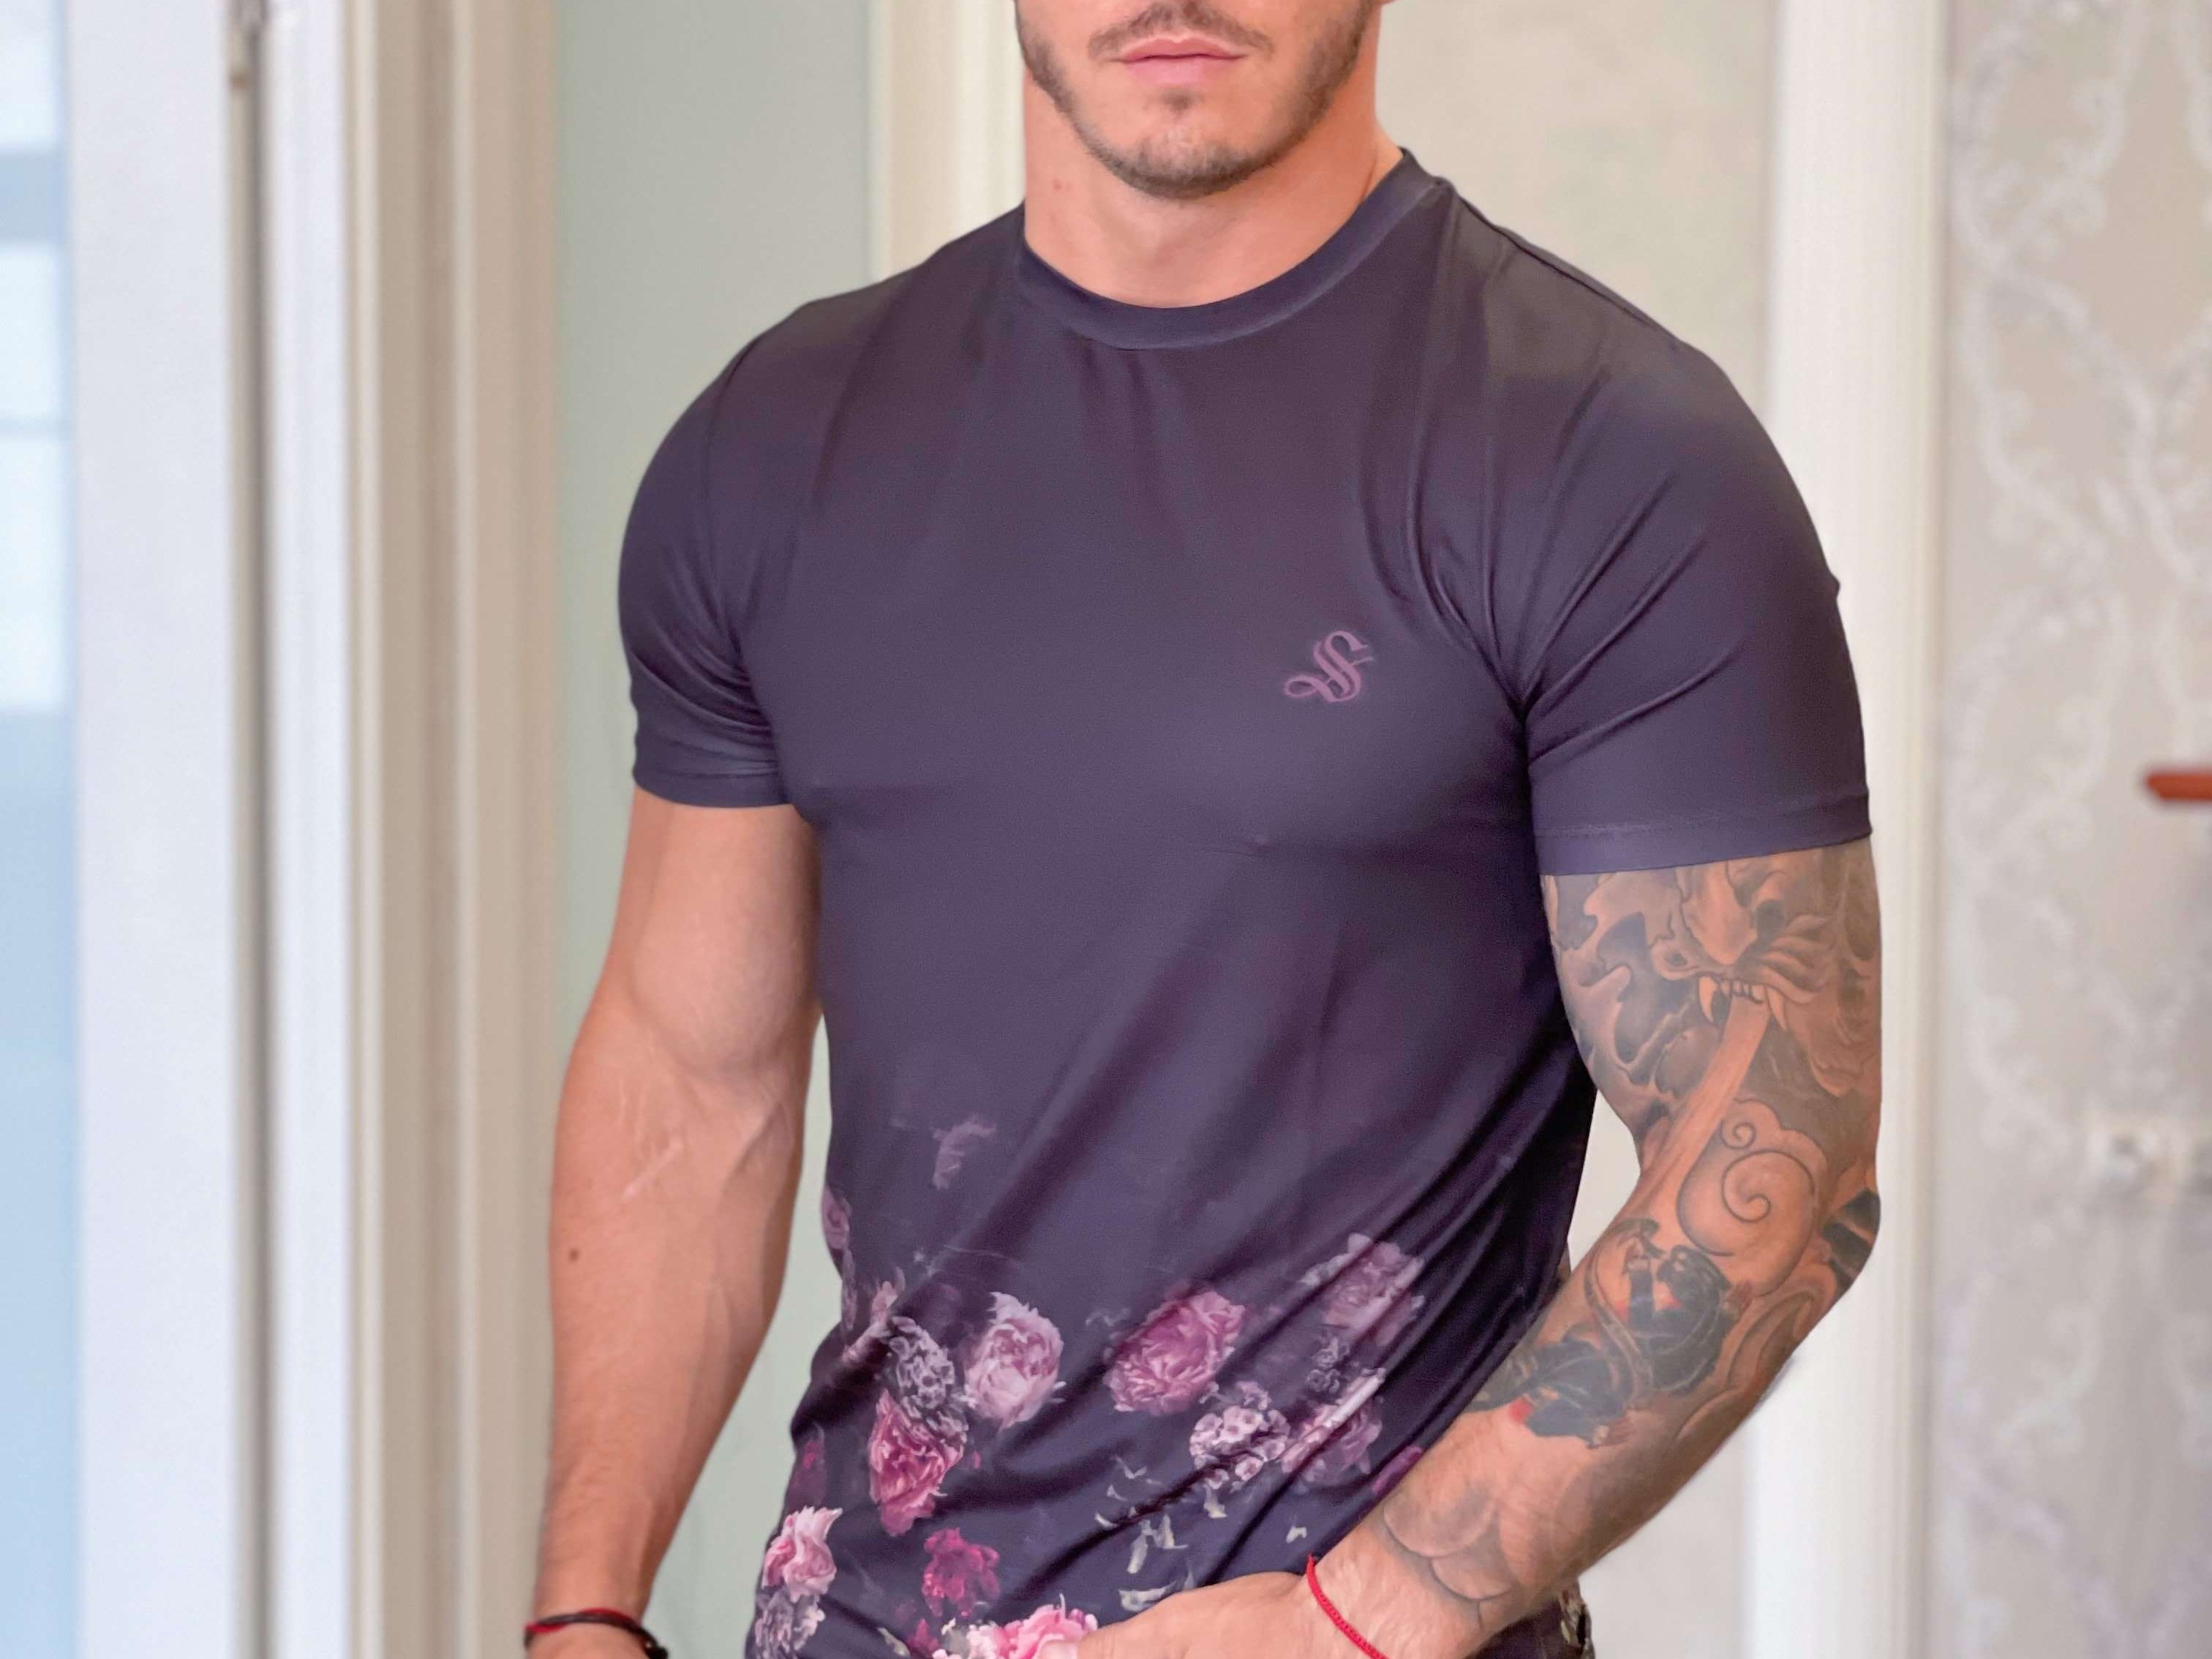 Malokia - T-Shirt for Men (PRE-ORDER DISPATCH DATE 1 JULY 2022) - Sarman Fashion - Wholesale Clothing Fashion Brand for Men from Canada